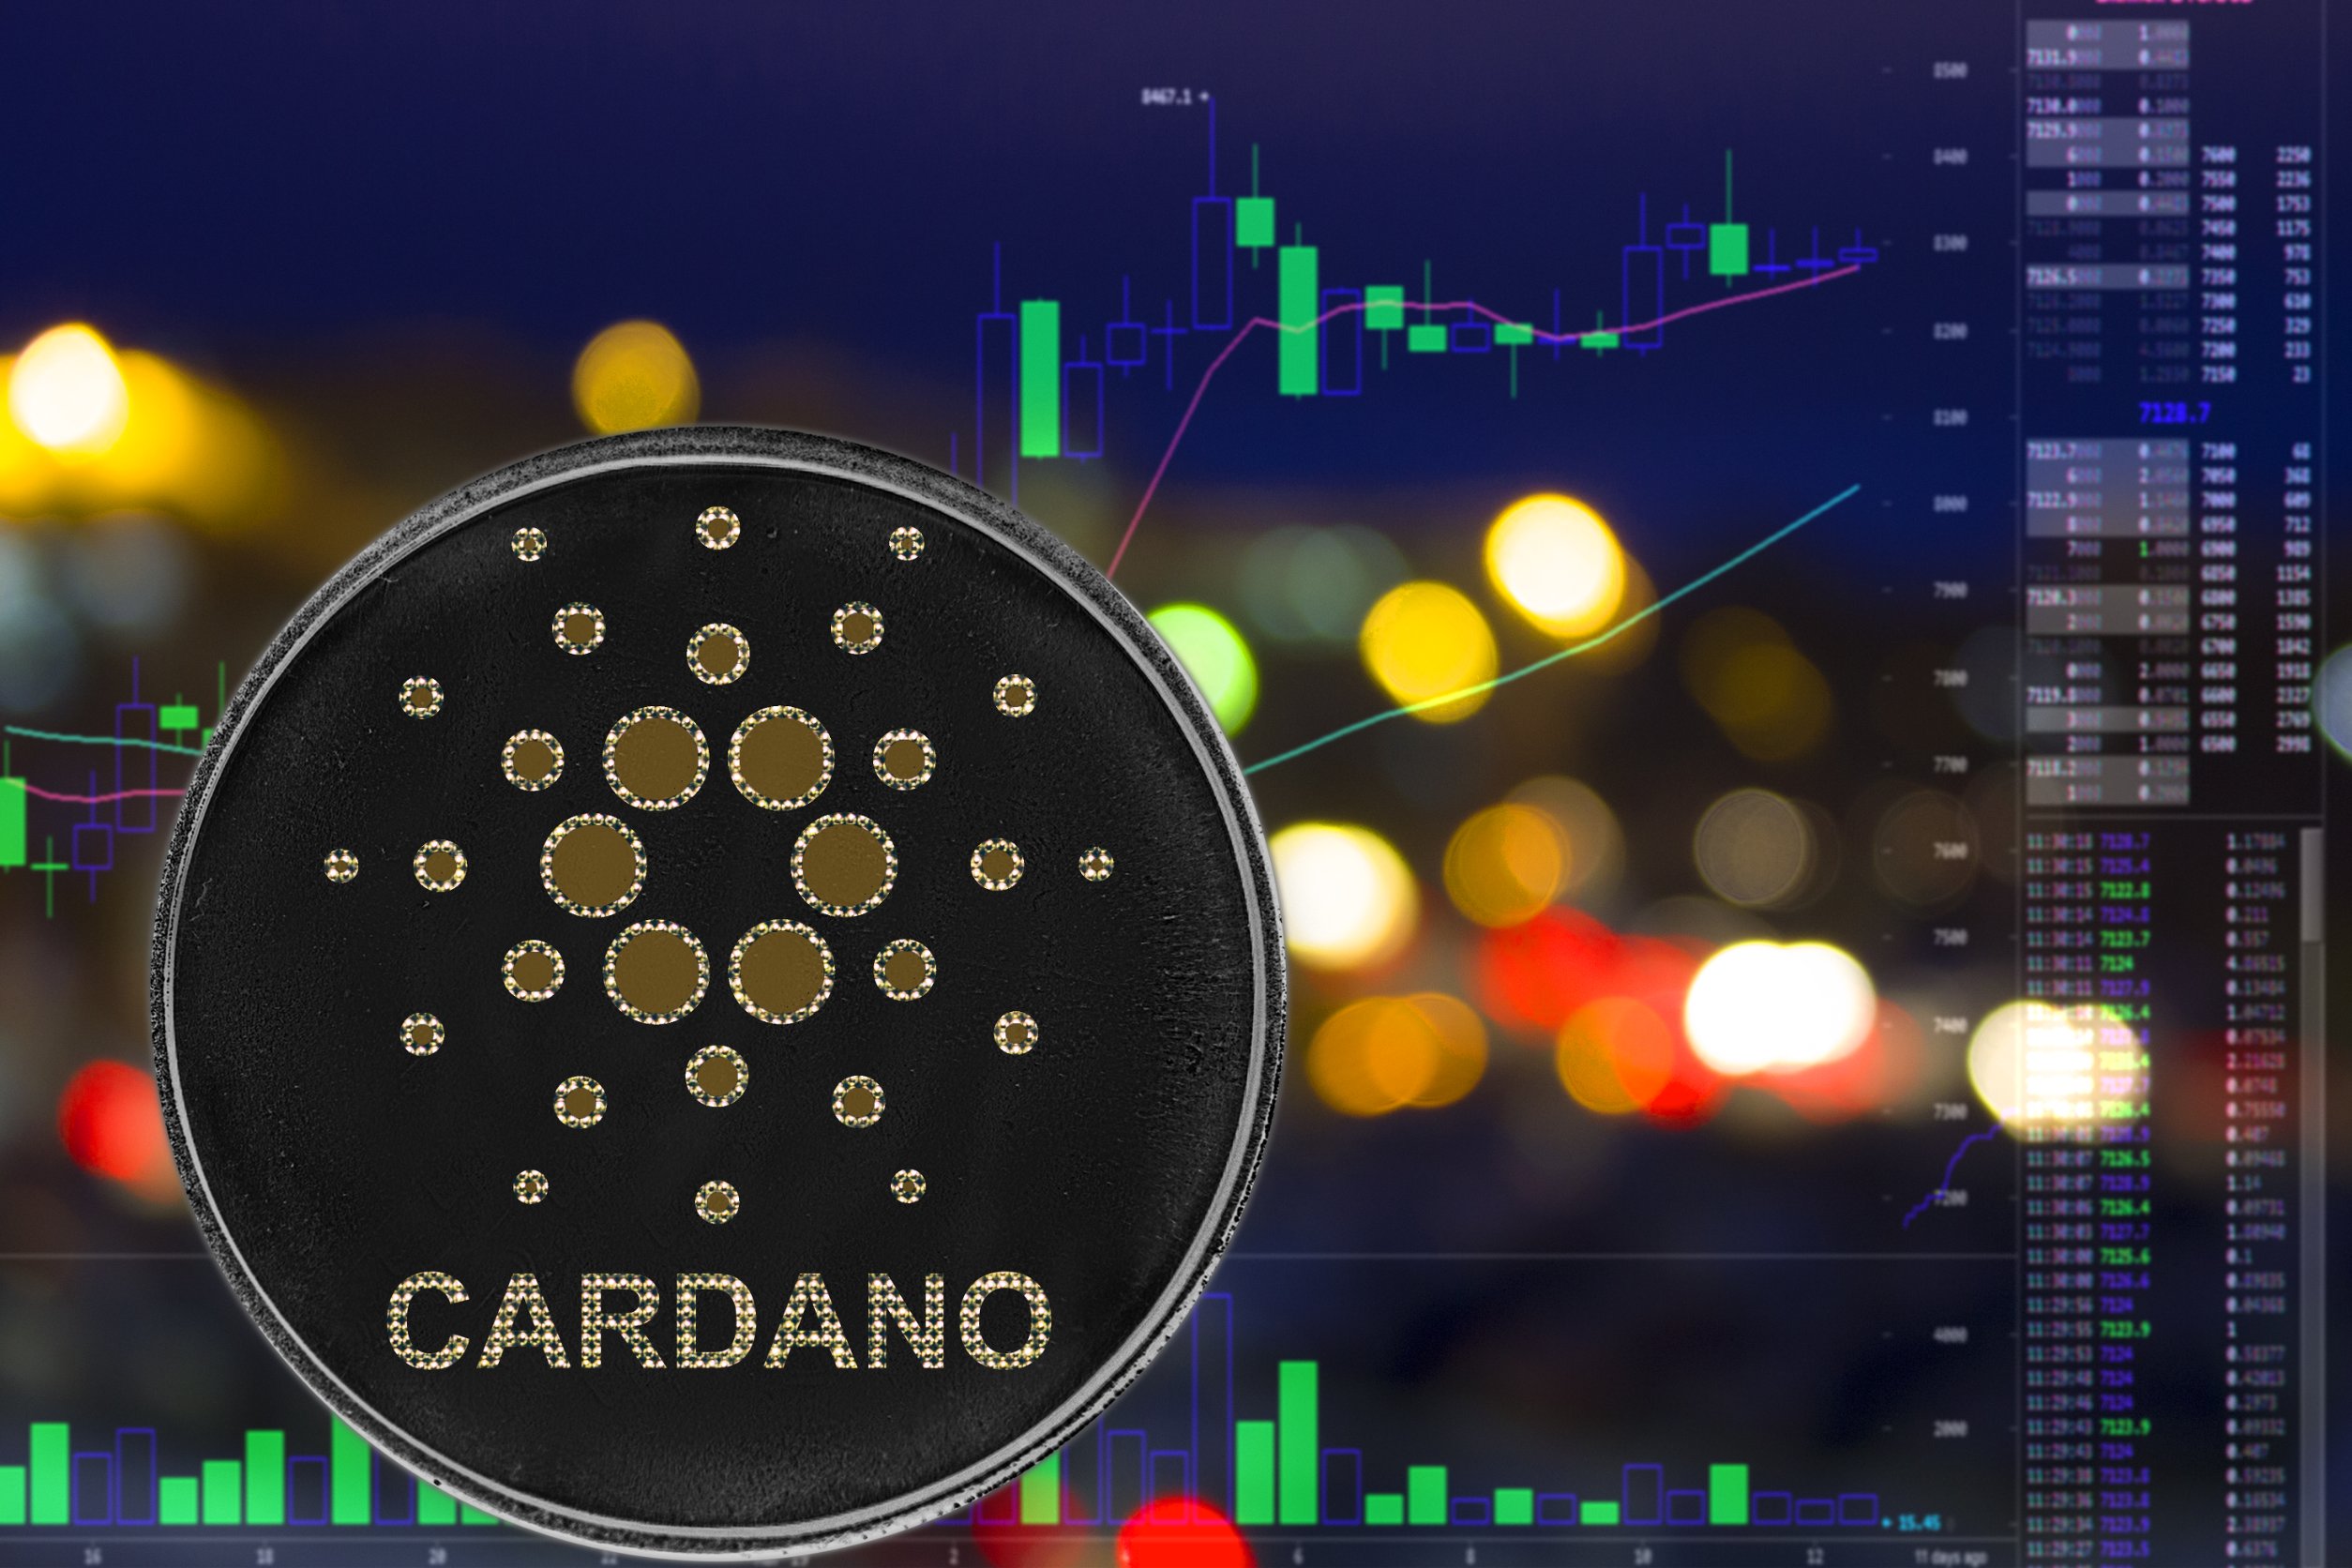 Cardano Price Needs to Clear Major Hurdle at $0.2785 for a Bullish Breakout